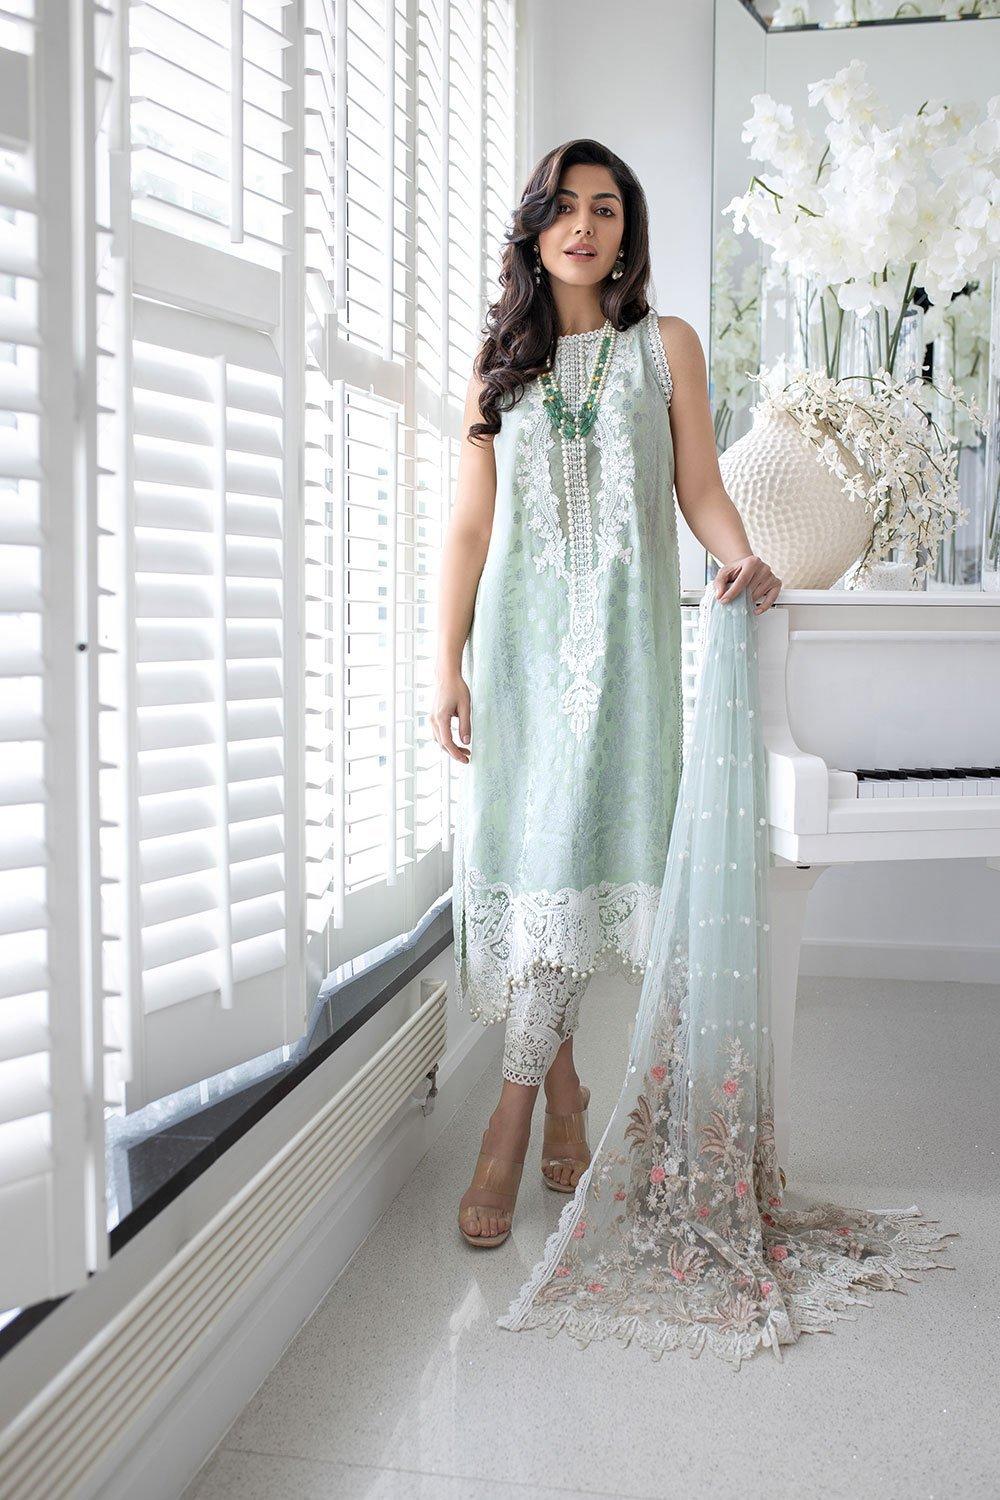 Buy Sobia Nazir’s Luxury Lawn Collection 2021 Green Lawn Dress from our website We are largest stockists of Sobia Nazir Lawn 2021 Maria b Pret collection The Pakistani designer are now trending in Mehndi, Eid Dresses Party dresses and Bridal Collection Buy dress pak in Birmingham UK USA Spain from Lebaasonline in SALE!